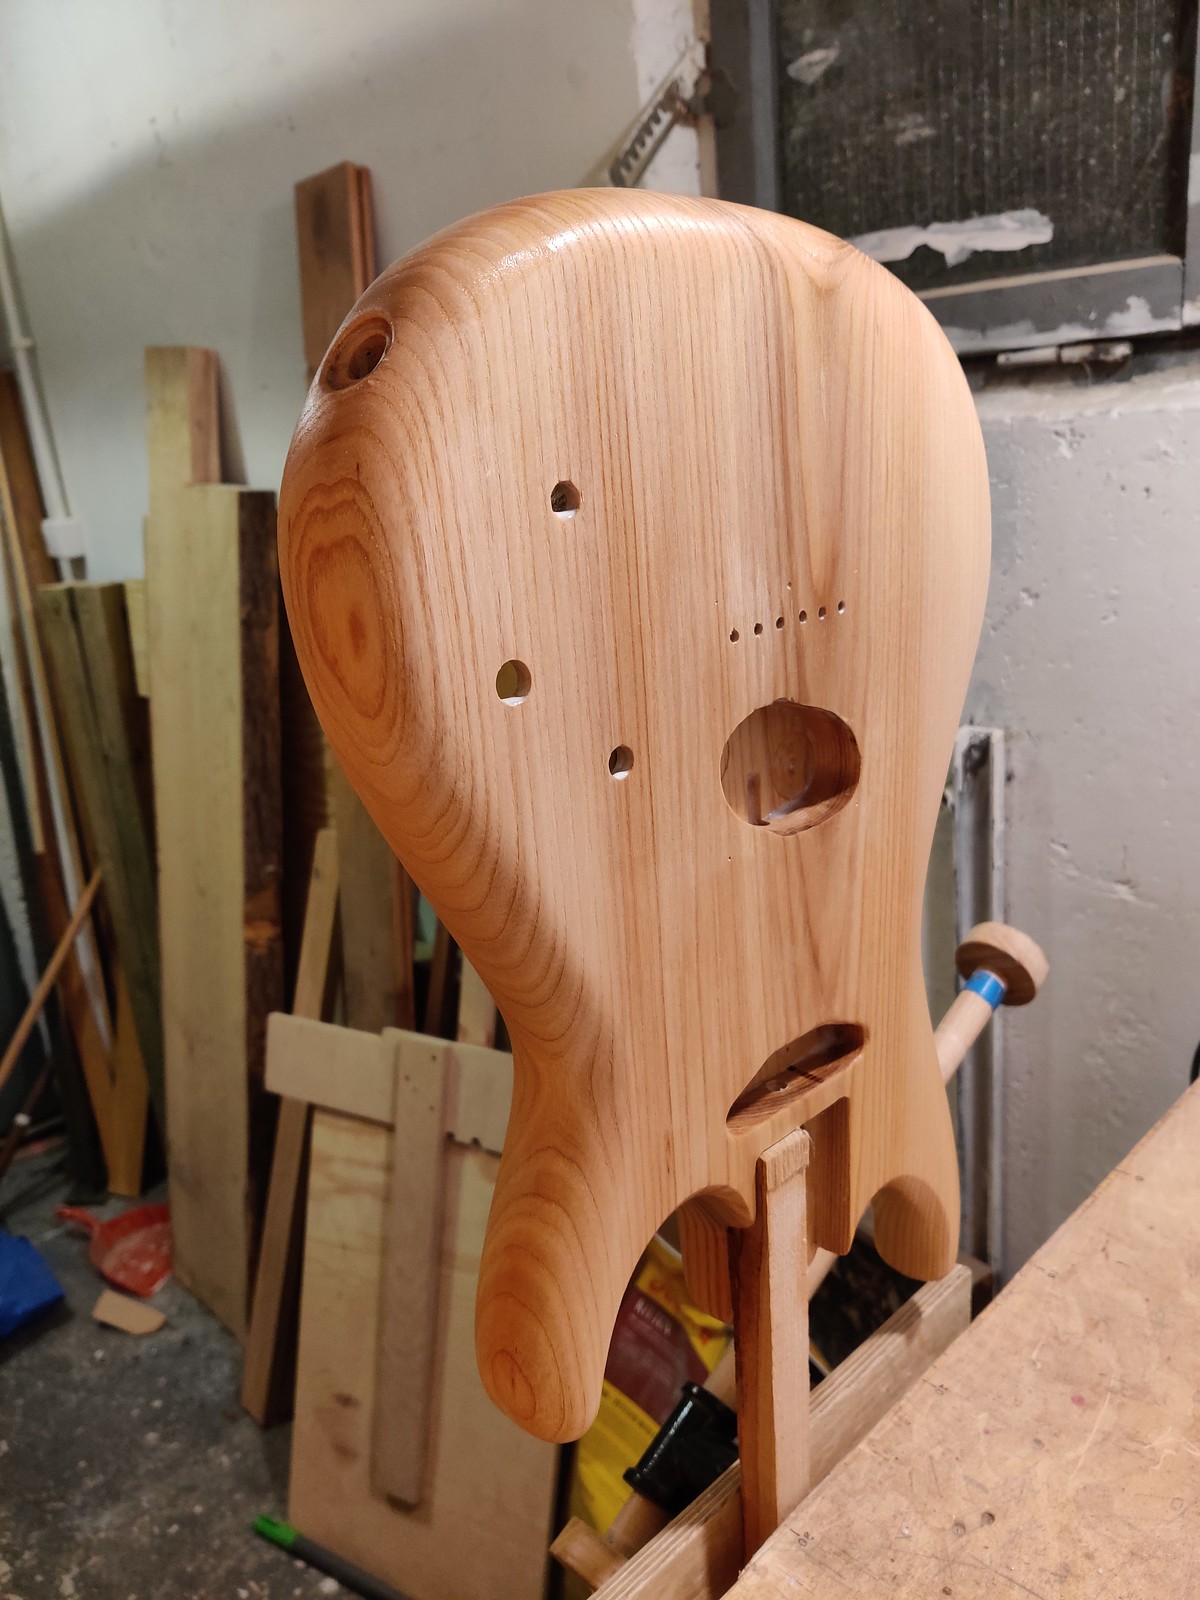 Guitar body with varnish drying on it